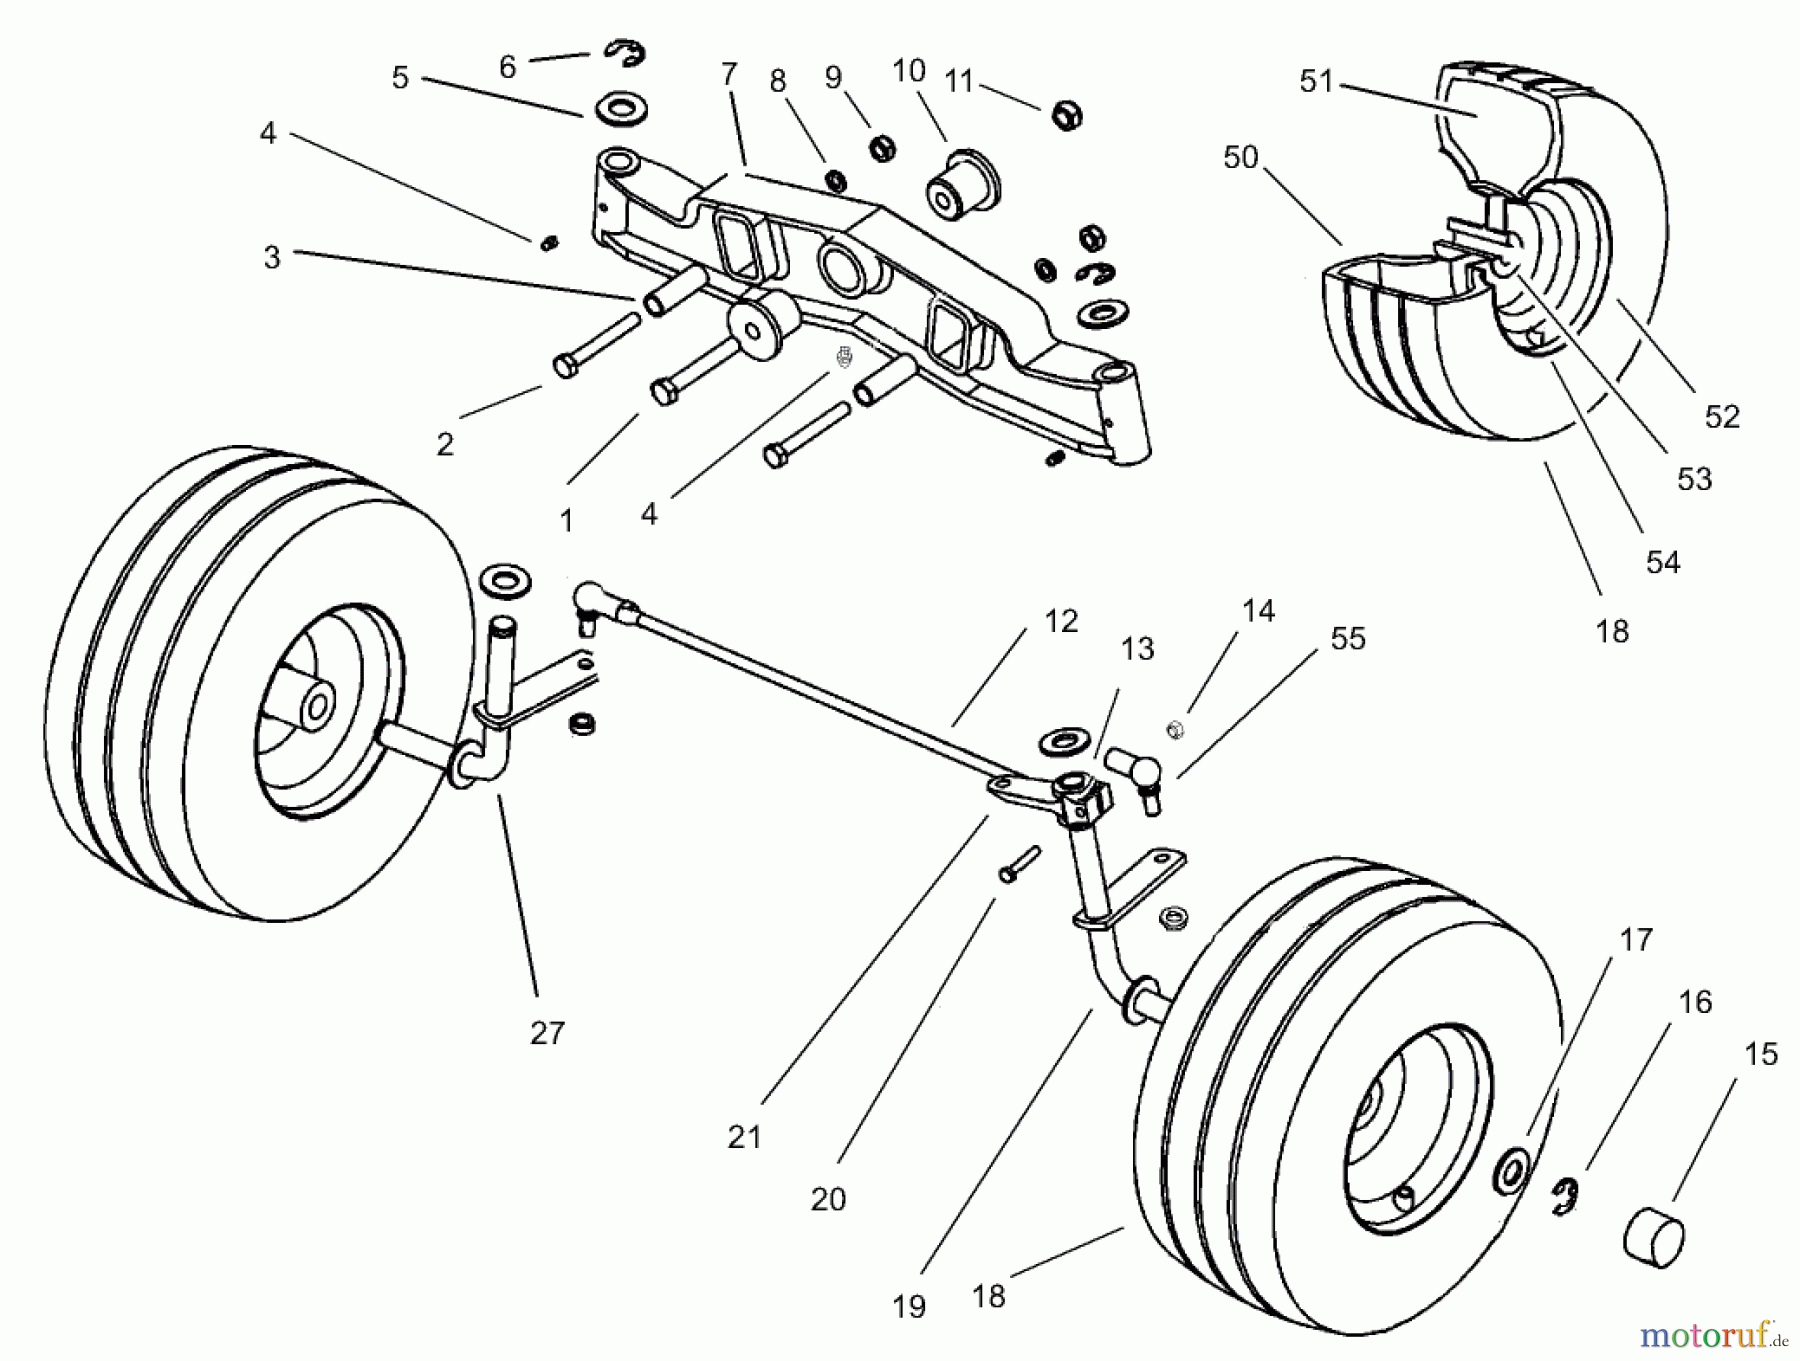  Toro Neu Mowers, Lawn & Garden Tractor Seite 1 74570 (170-DH) - Toro 170-DH Lawn Tractor, 2000 (200000001-200999999) FRONT AXLE ASSEMBLY